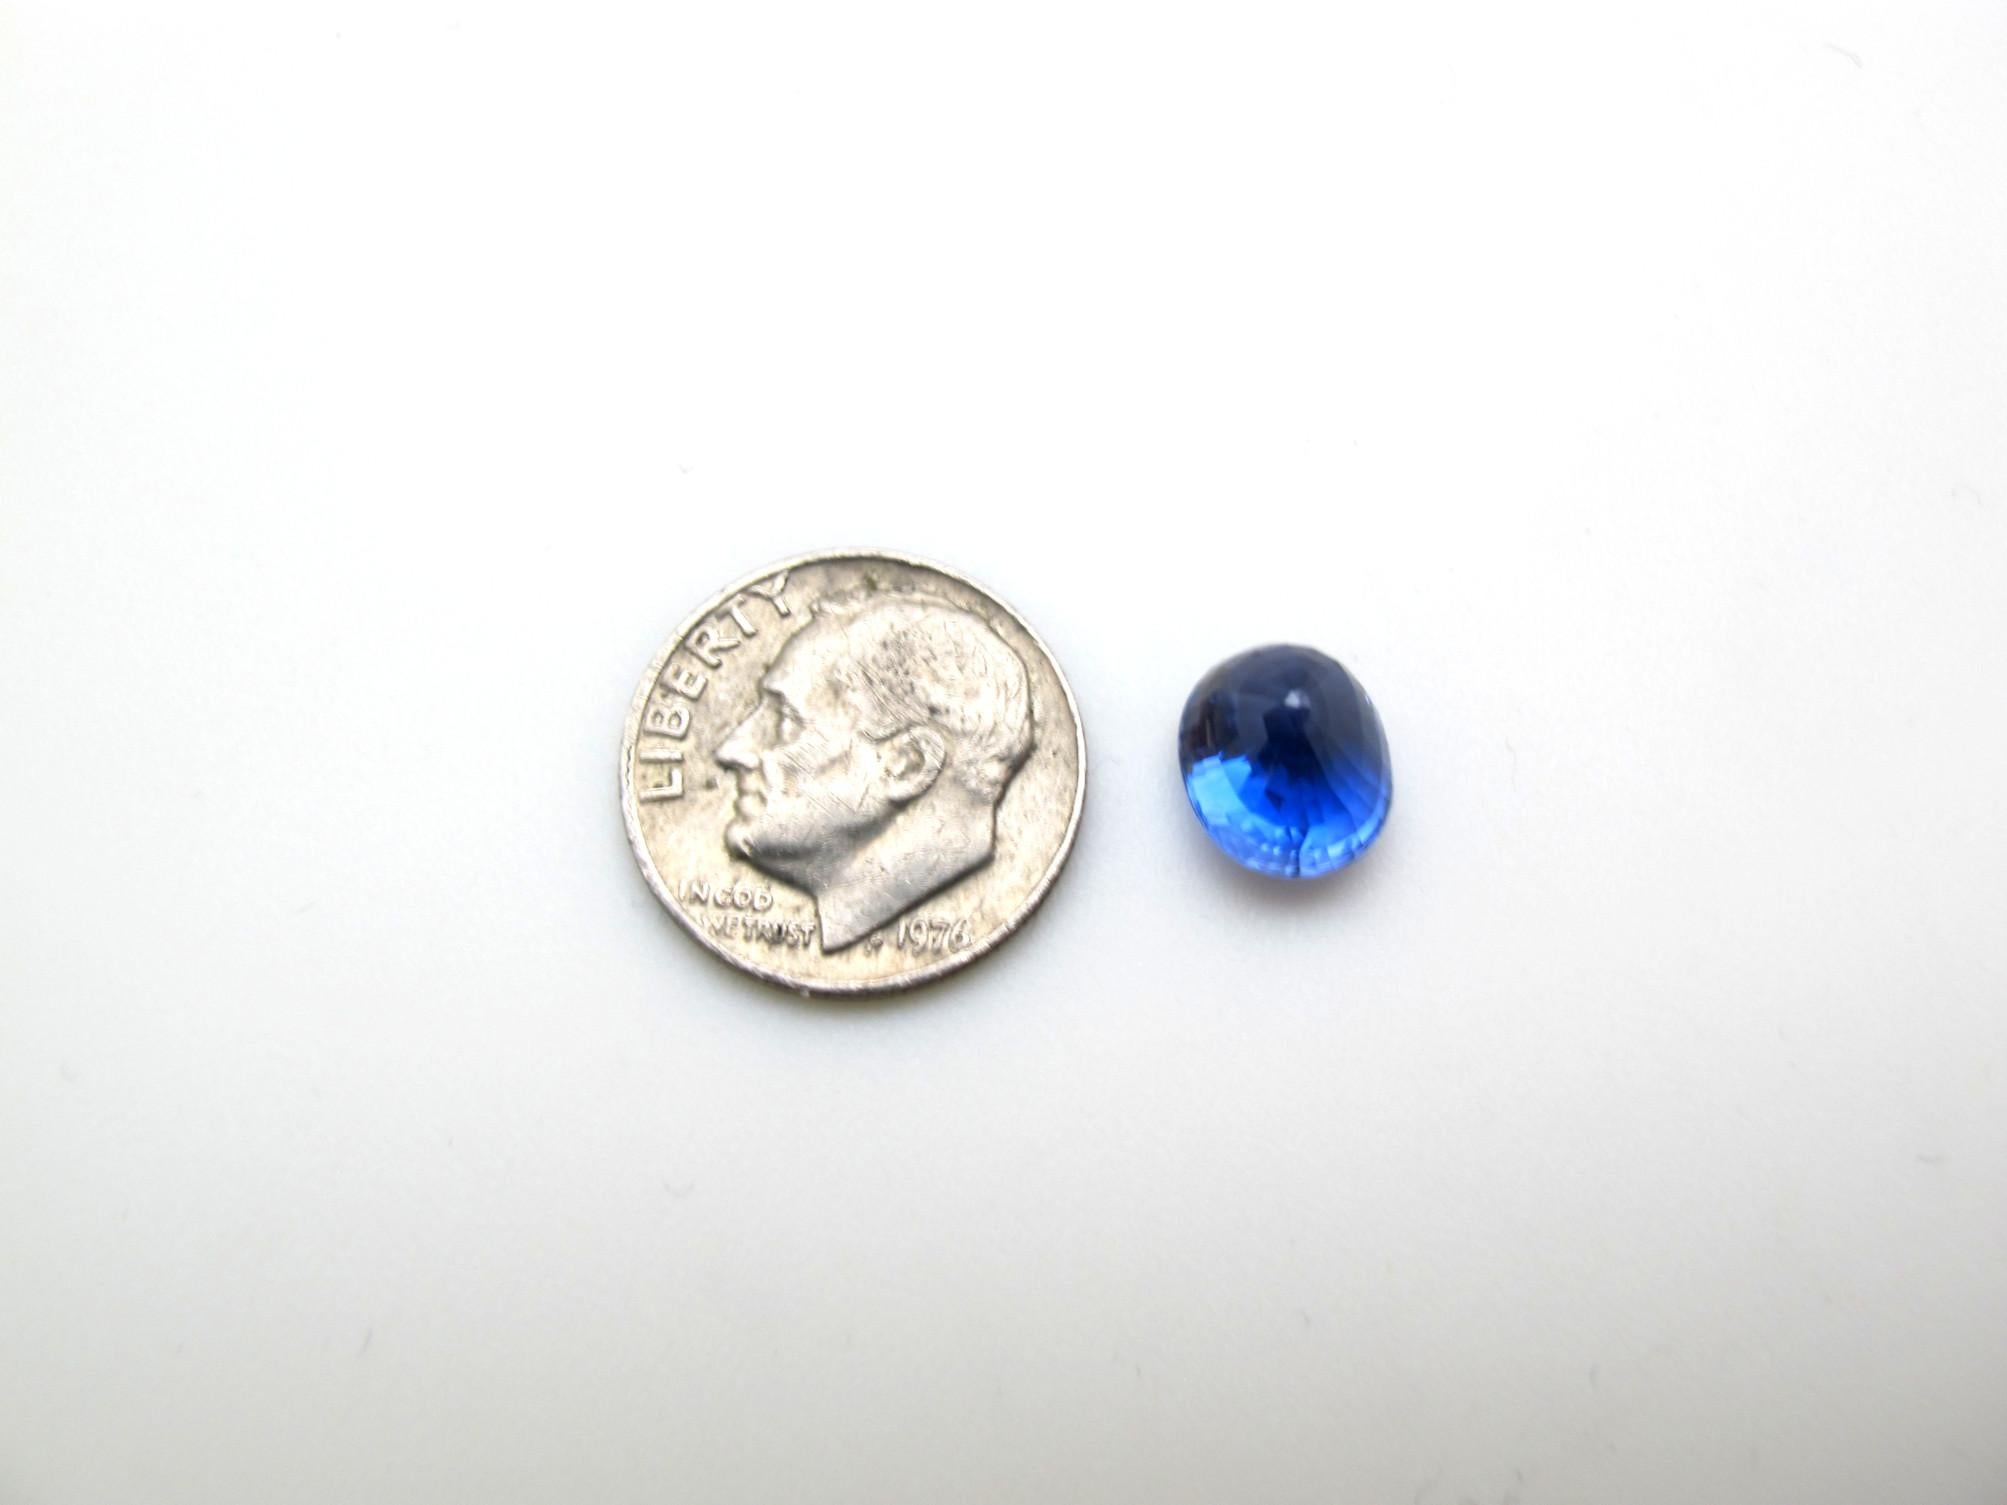 This sapphire is a beautiful, slightly violetish-blue color. It is very brilliant and free from inclusions. This gem measures 9.11 x 8.00 x 6.5mm, weighs 4.56 carats, and would make a stunning custom-made ring or pendant.. It is accompanied by